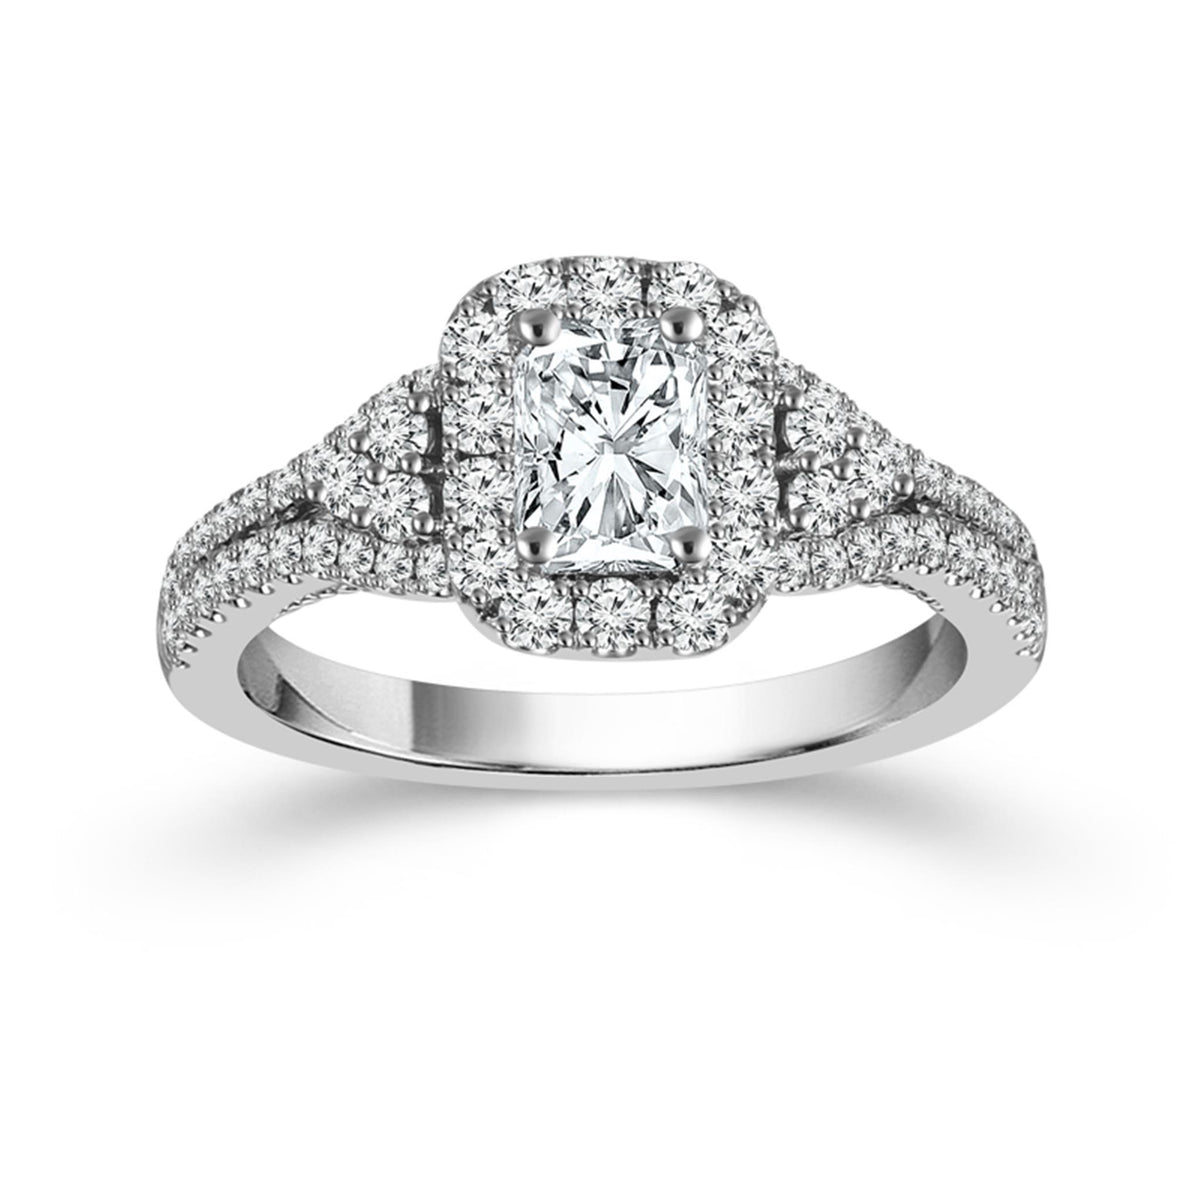 14Kt White Gold Halo Engagement Ring With 0.75ct Natural Center Diamond